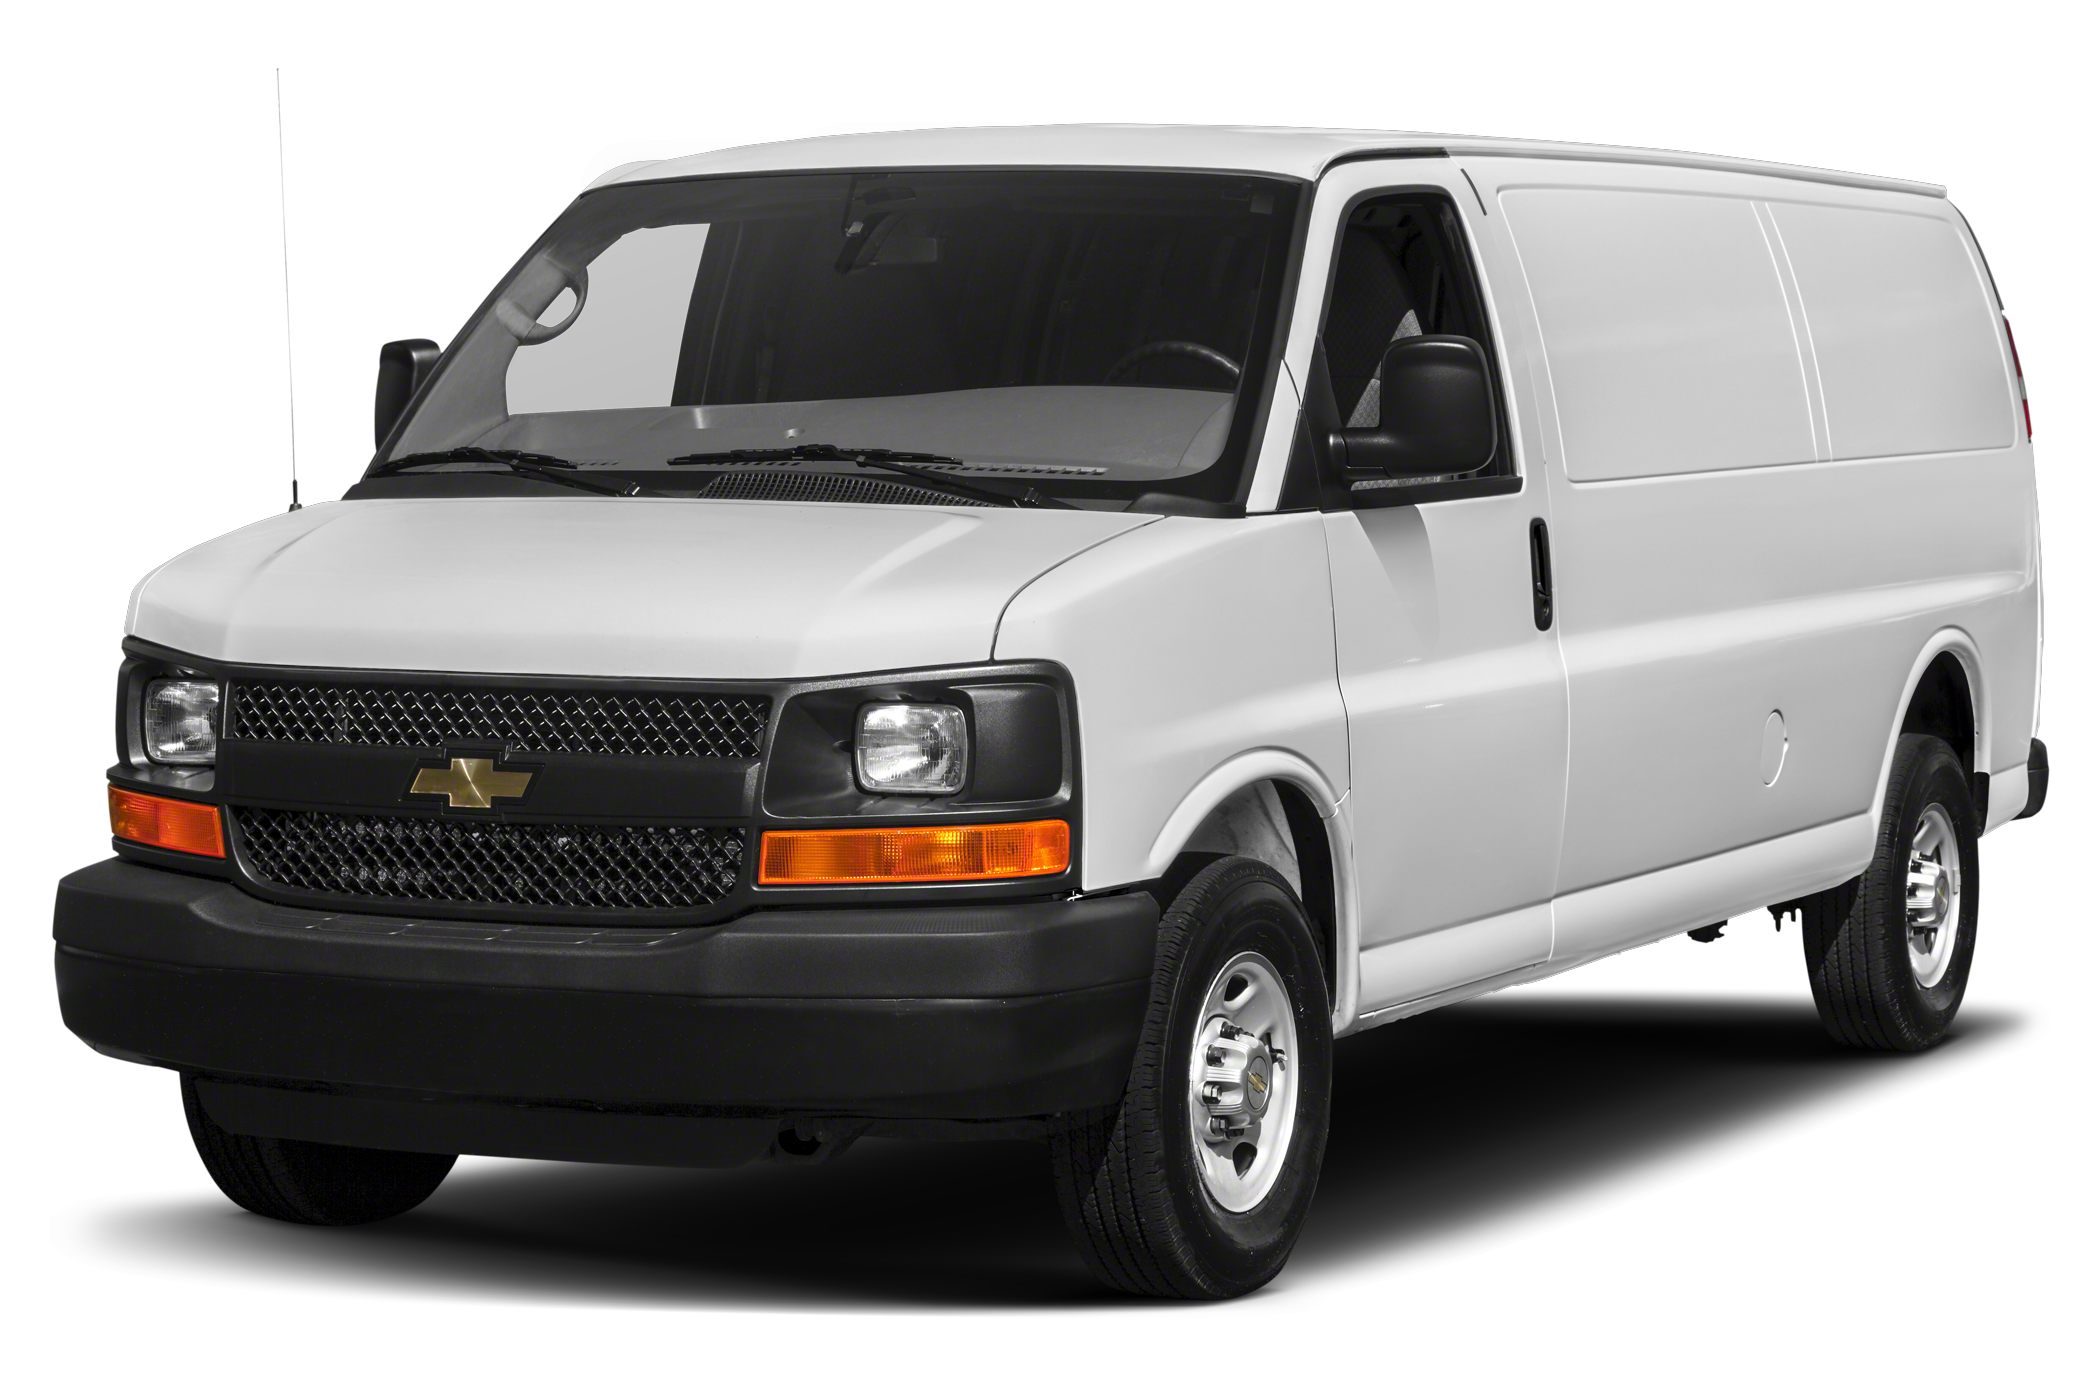 2011 chevy express 2500 for sale